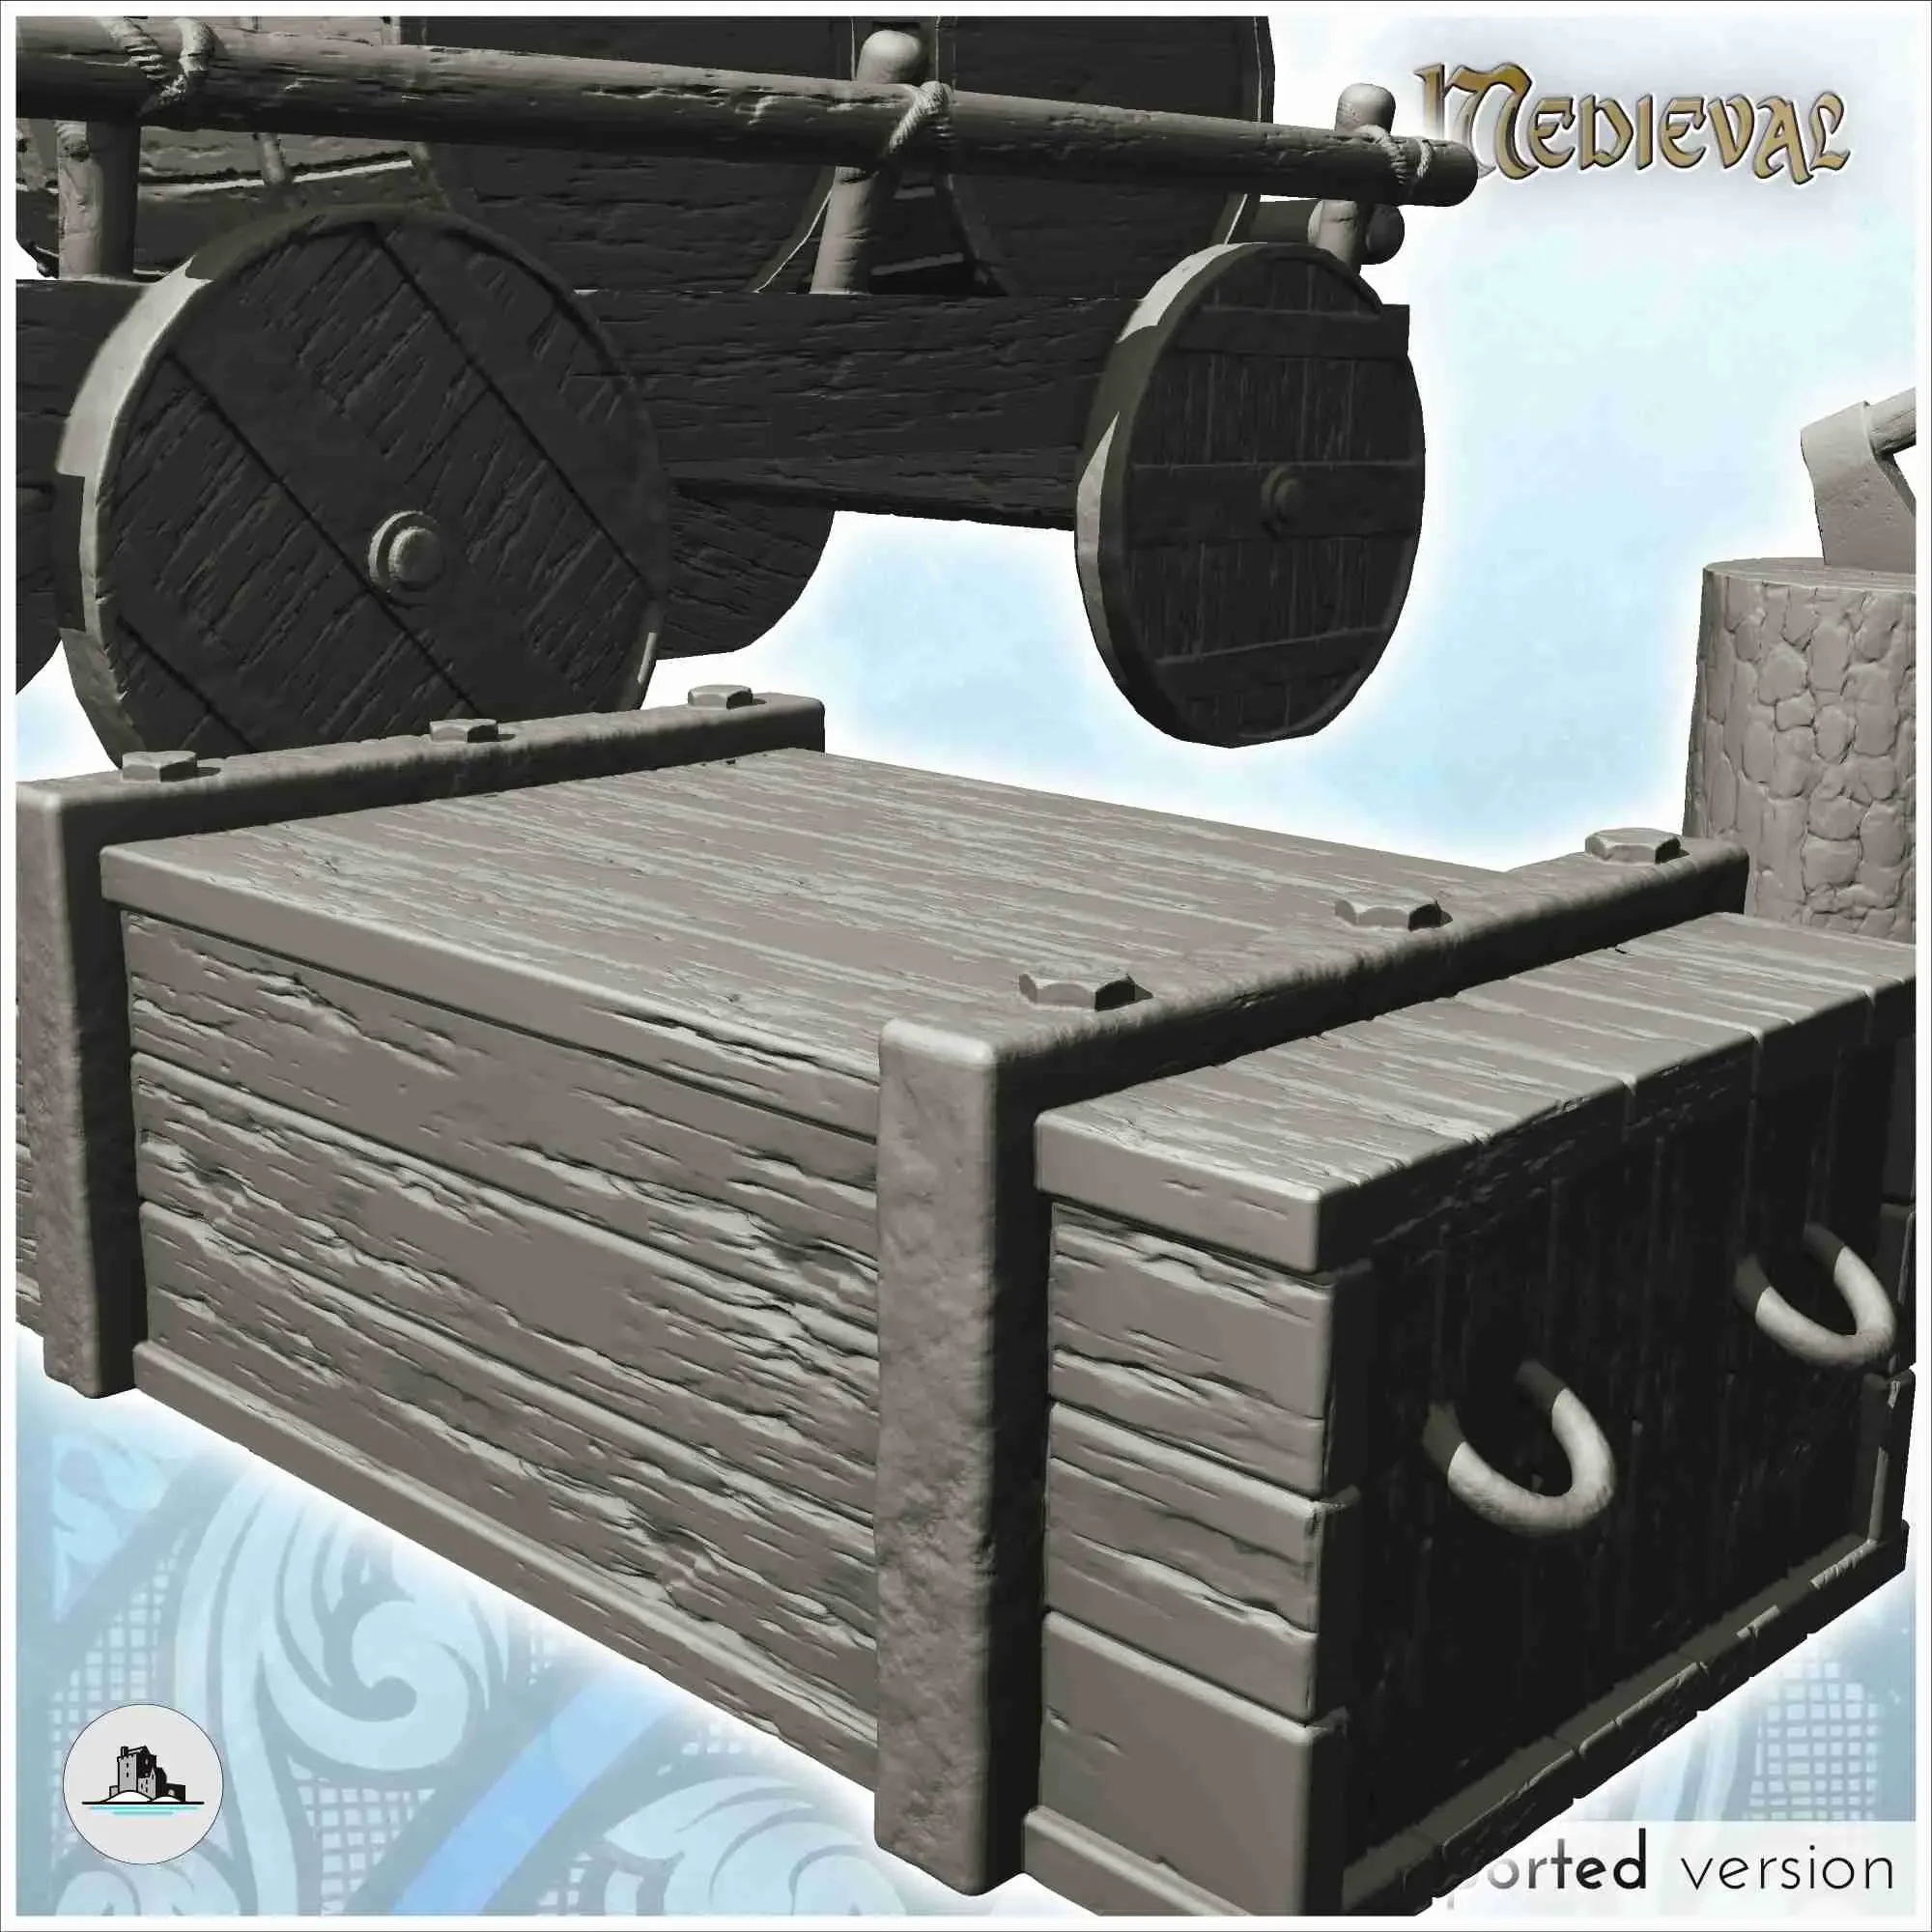 Medieval equipment set with cart, crate and axe (1) - scener